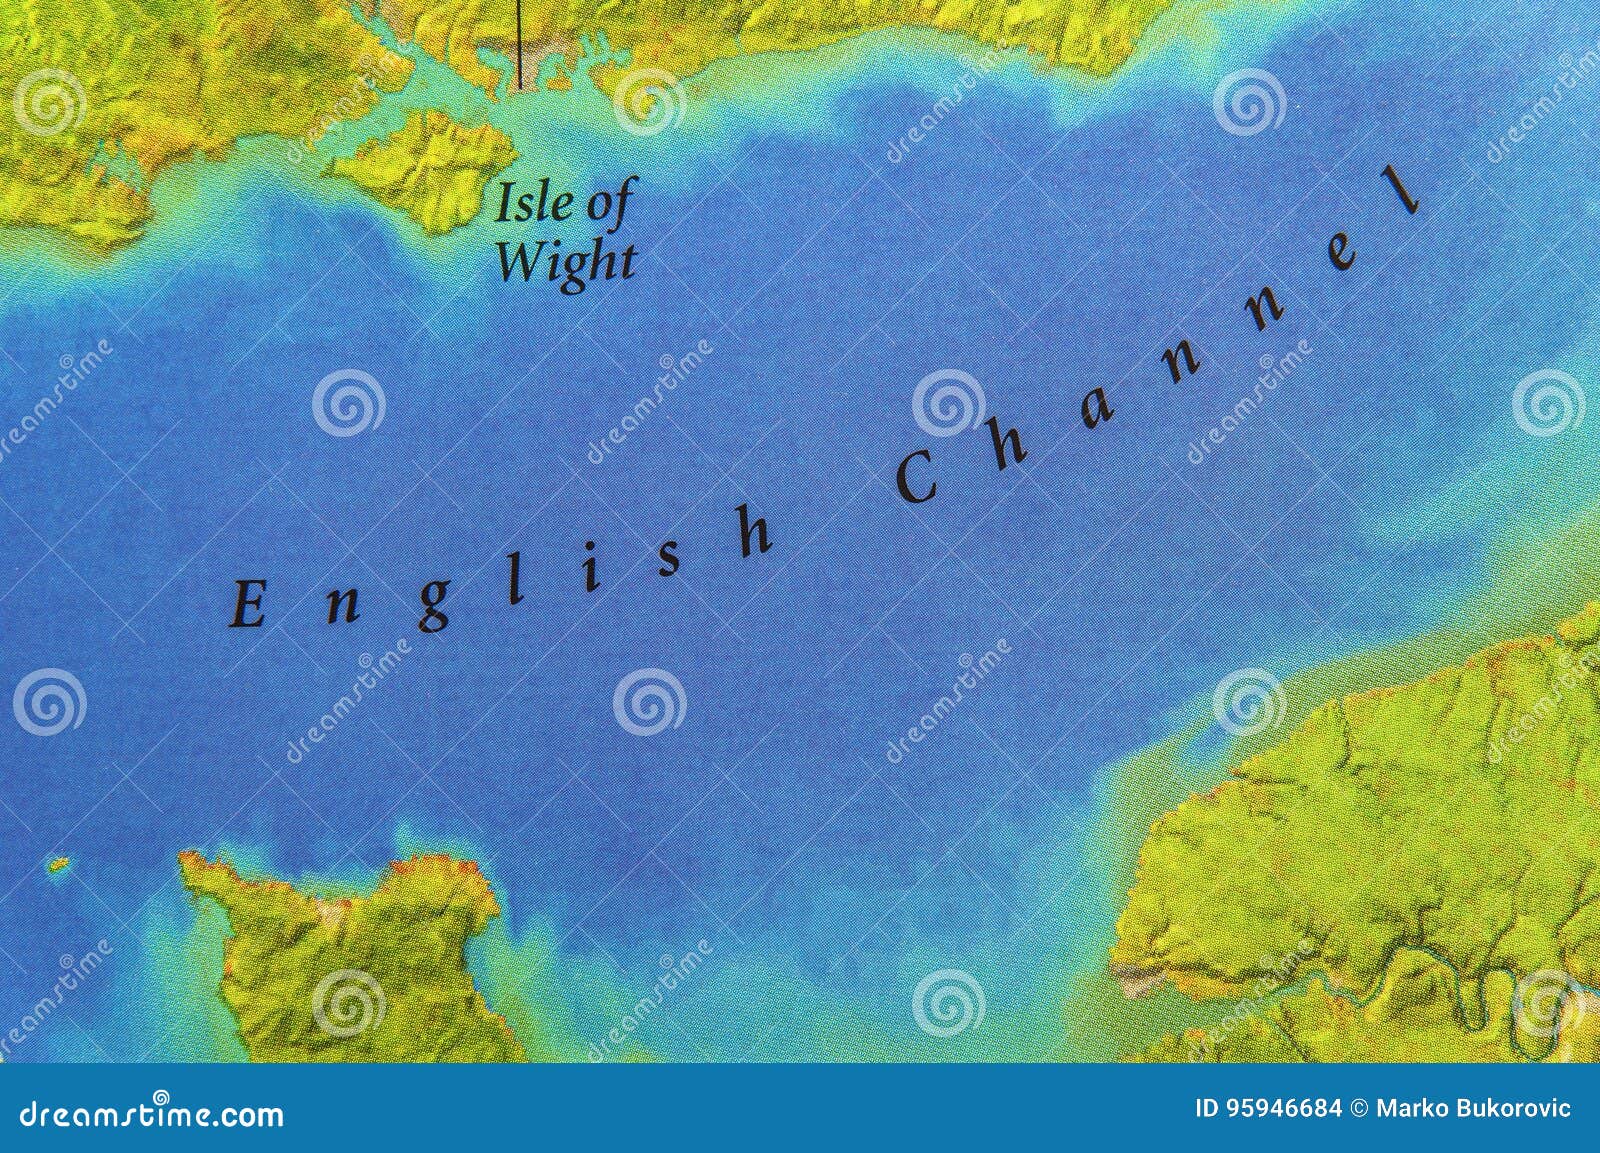 english channel map